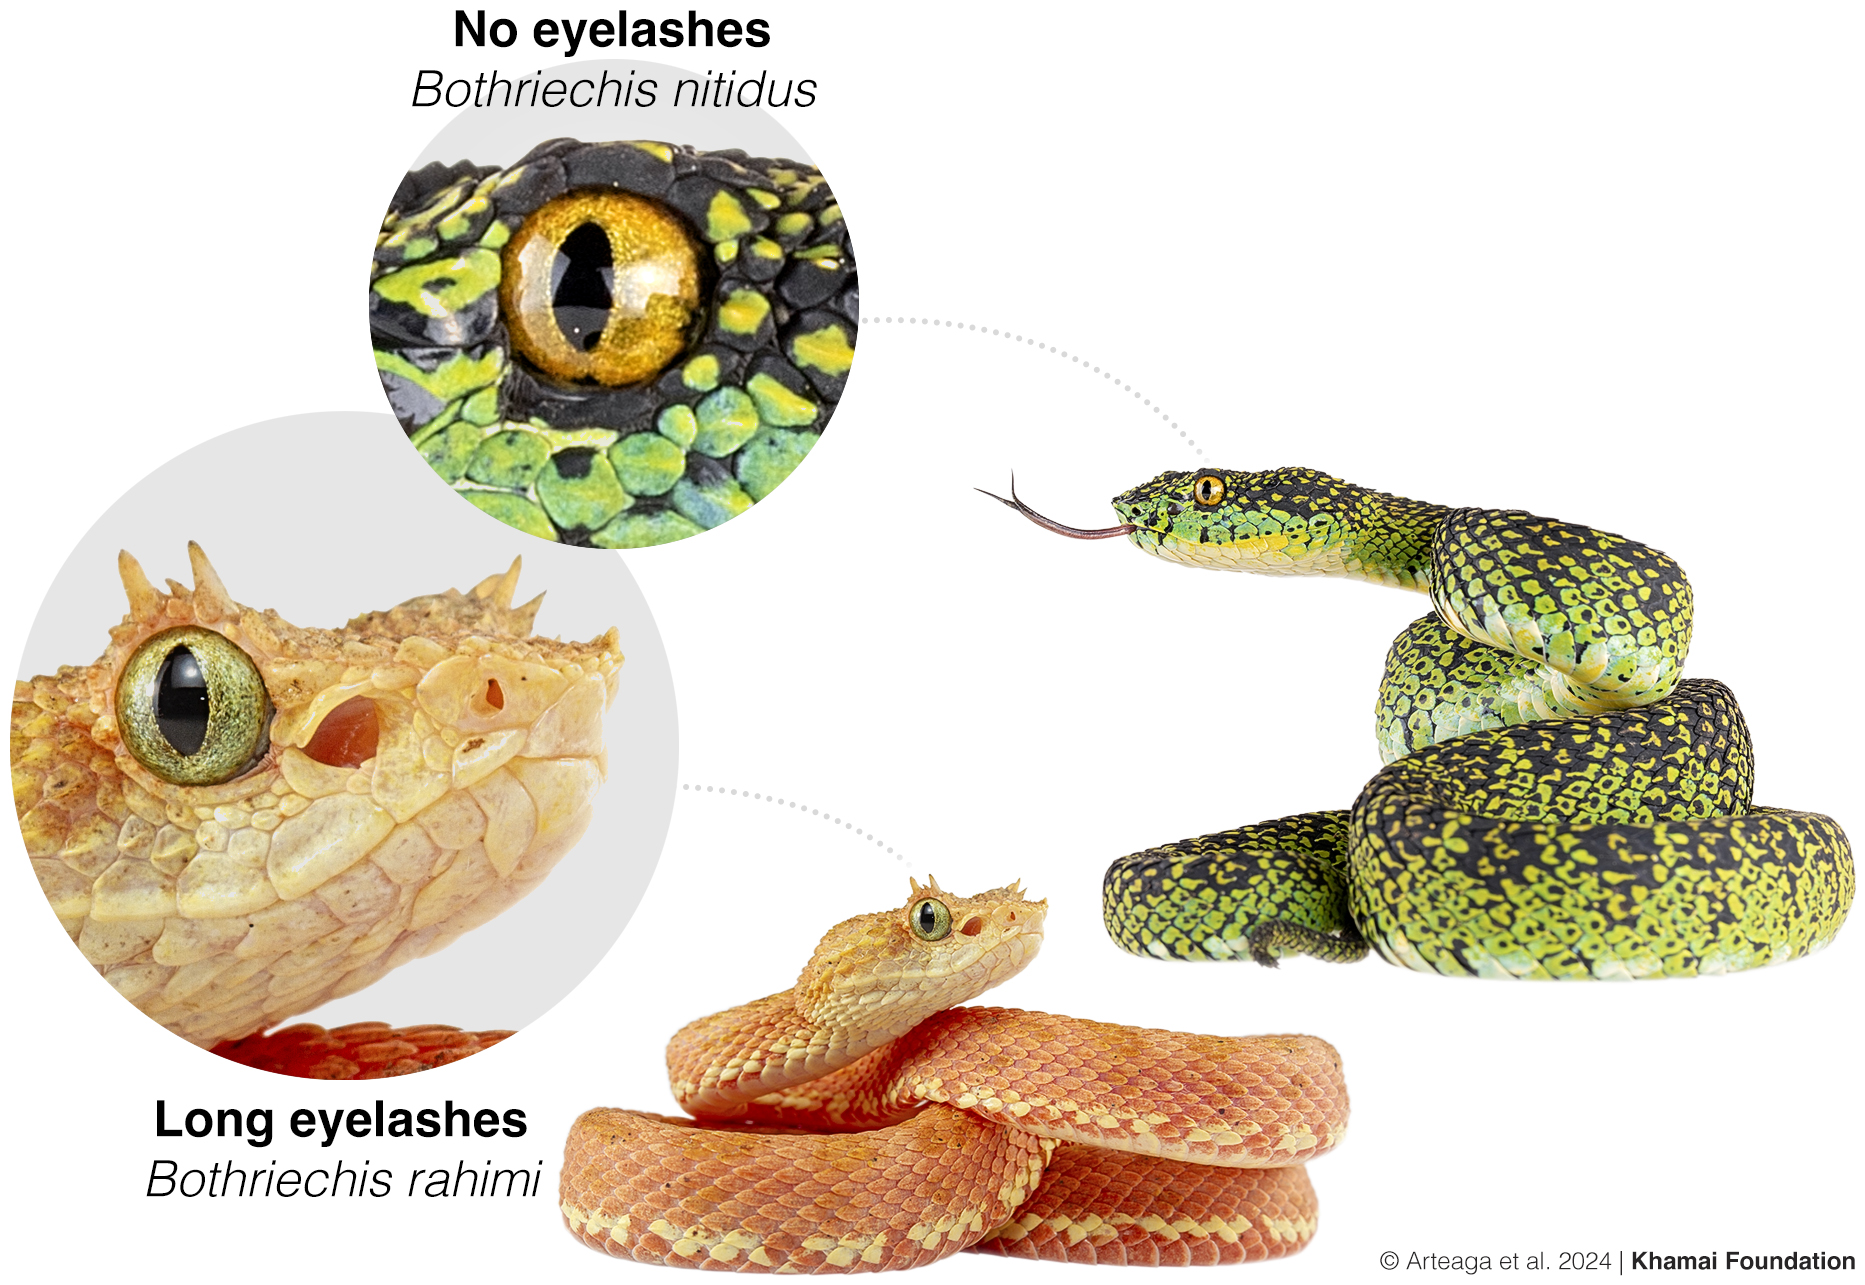 Figure showing the condition of the eyelashes in two species of Bothriechis